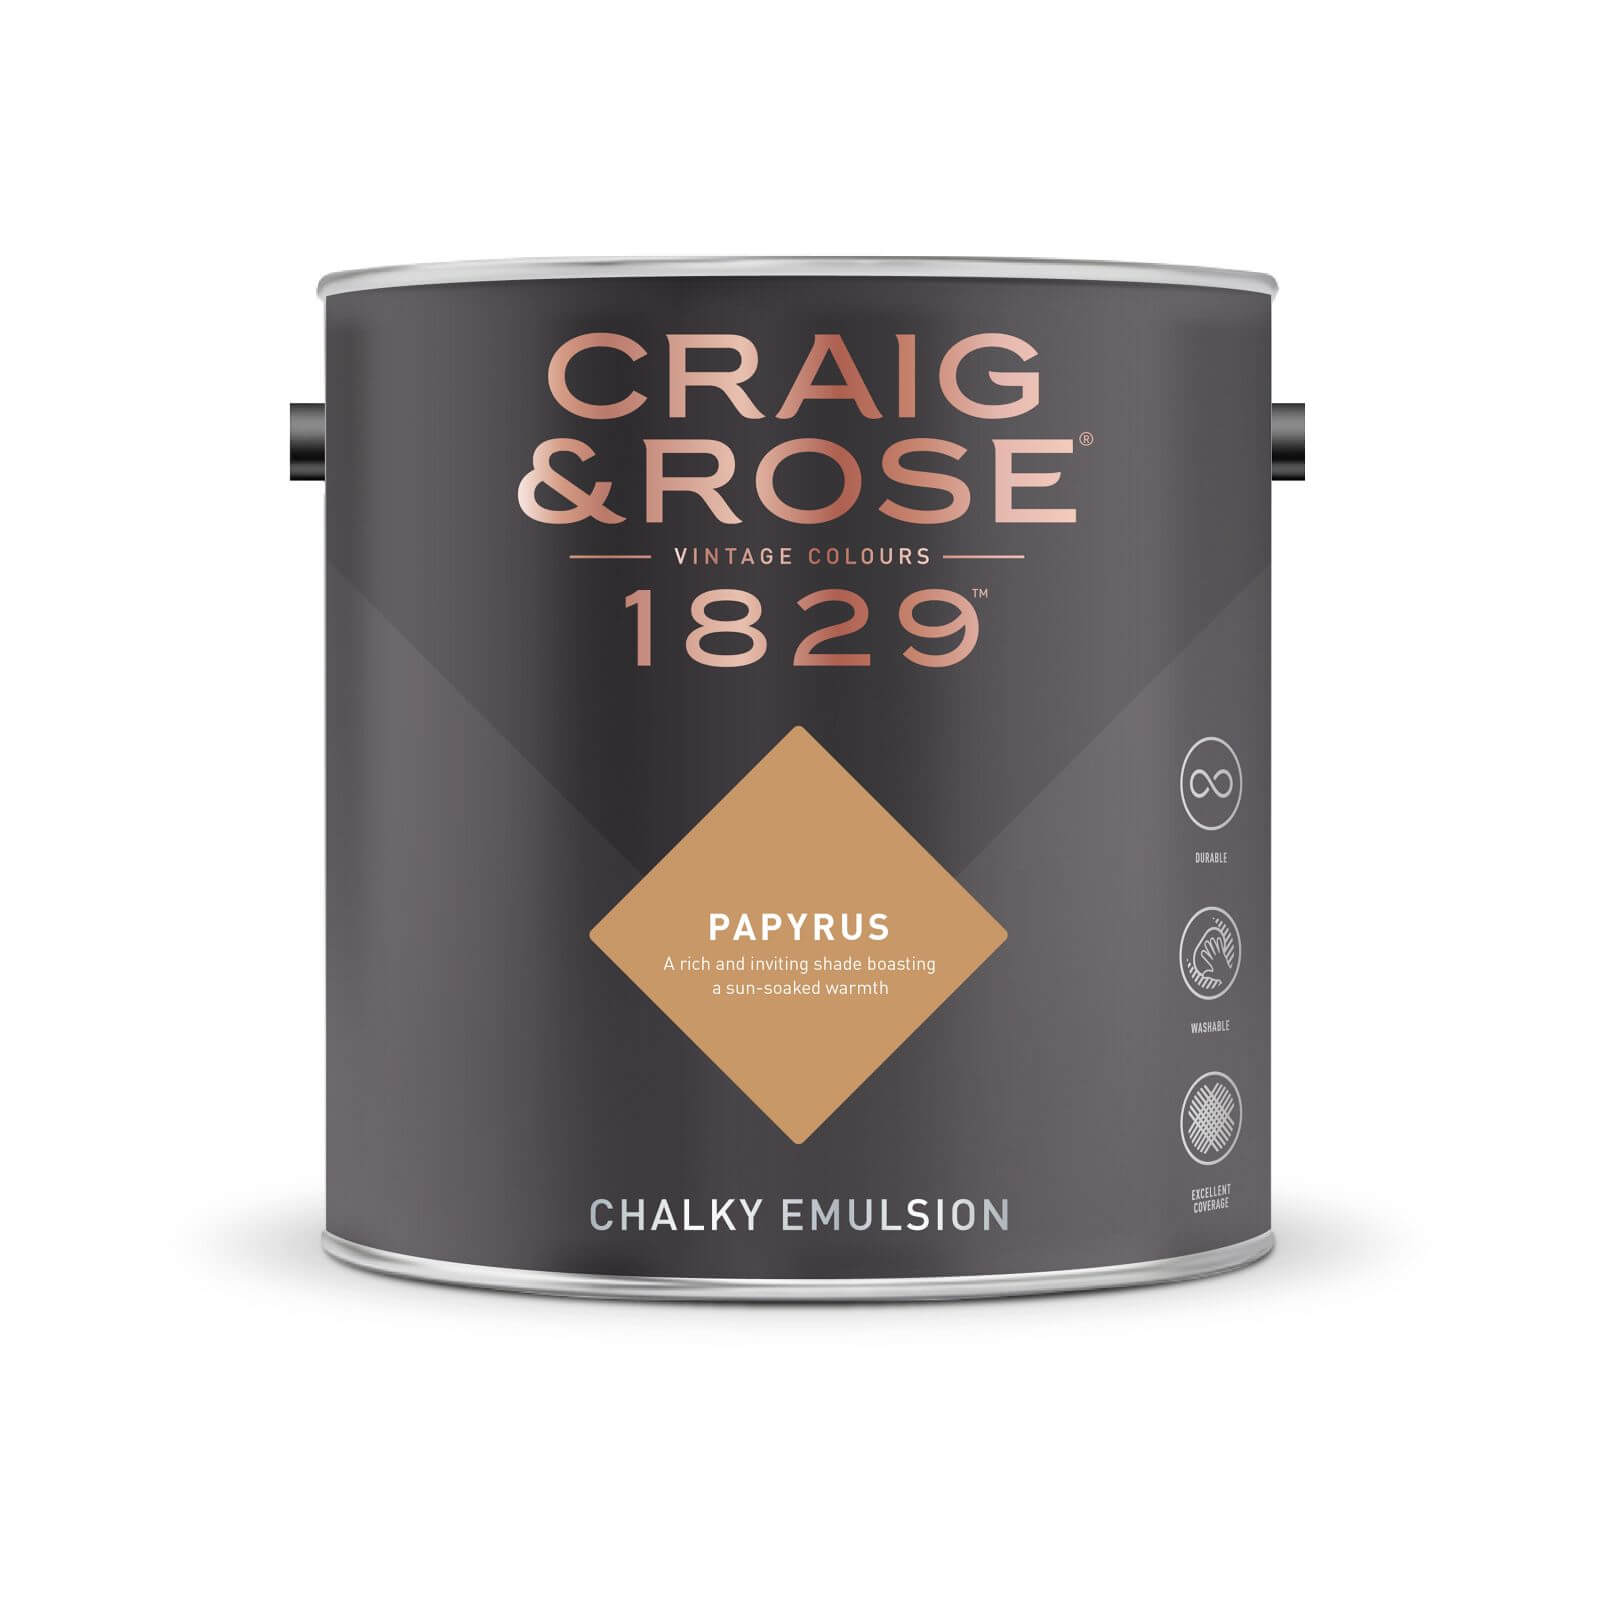 Craig & Rose 1829 Chalky Emulsion Paint Papyrus- Tester 50ml